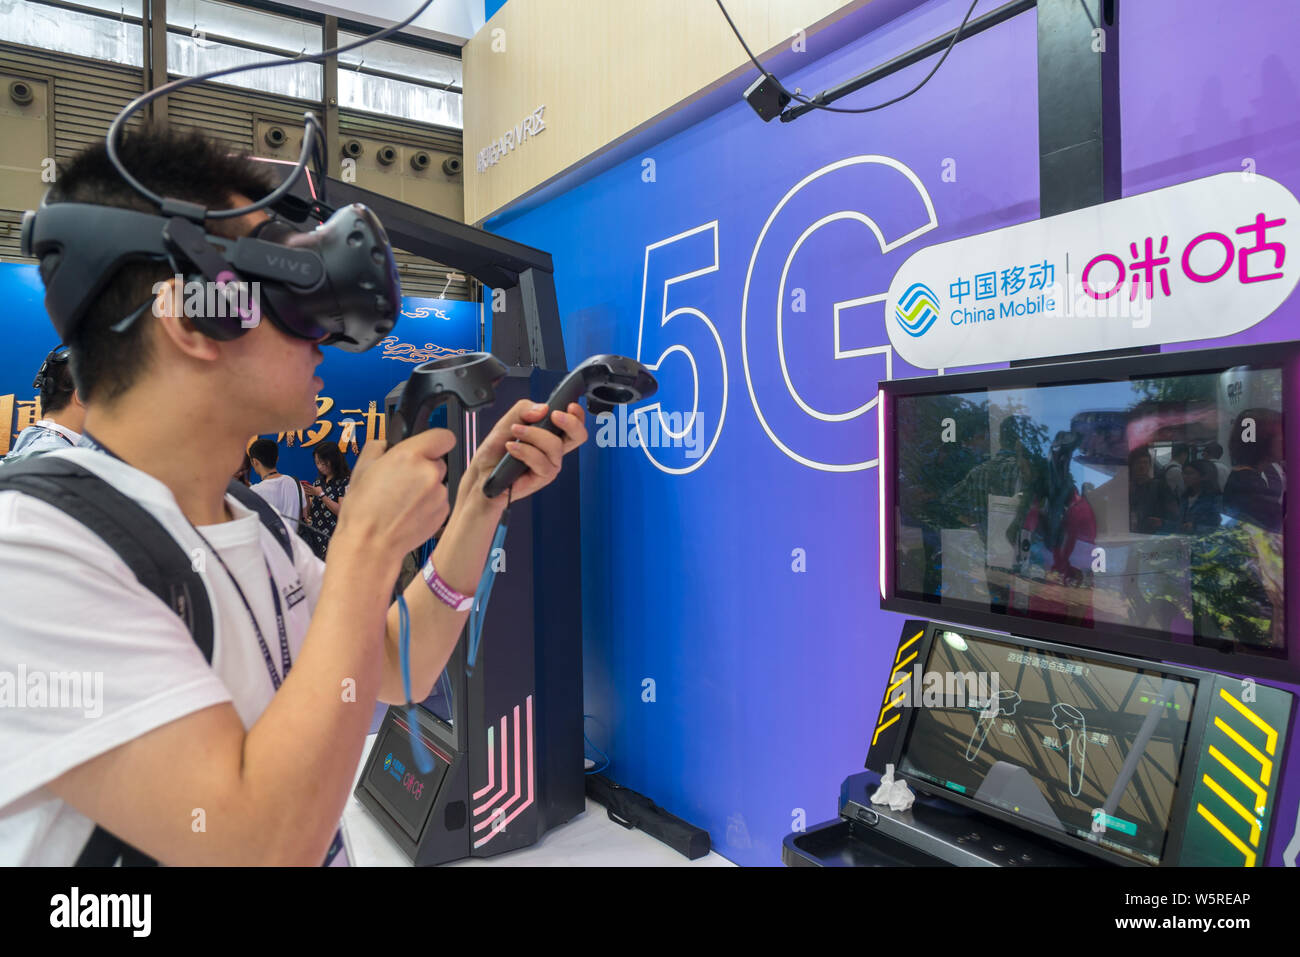 A visitor tries out virtual reality glasses via 5G technology during the 2019 Mobile World Congress (MWC) in Shanghai, China, 26 June 2019.  The 5G te Stock Photo